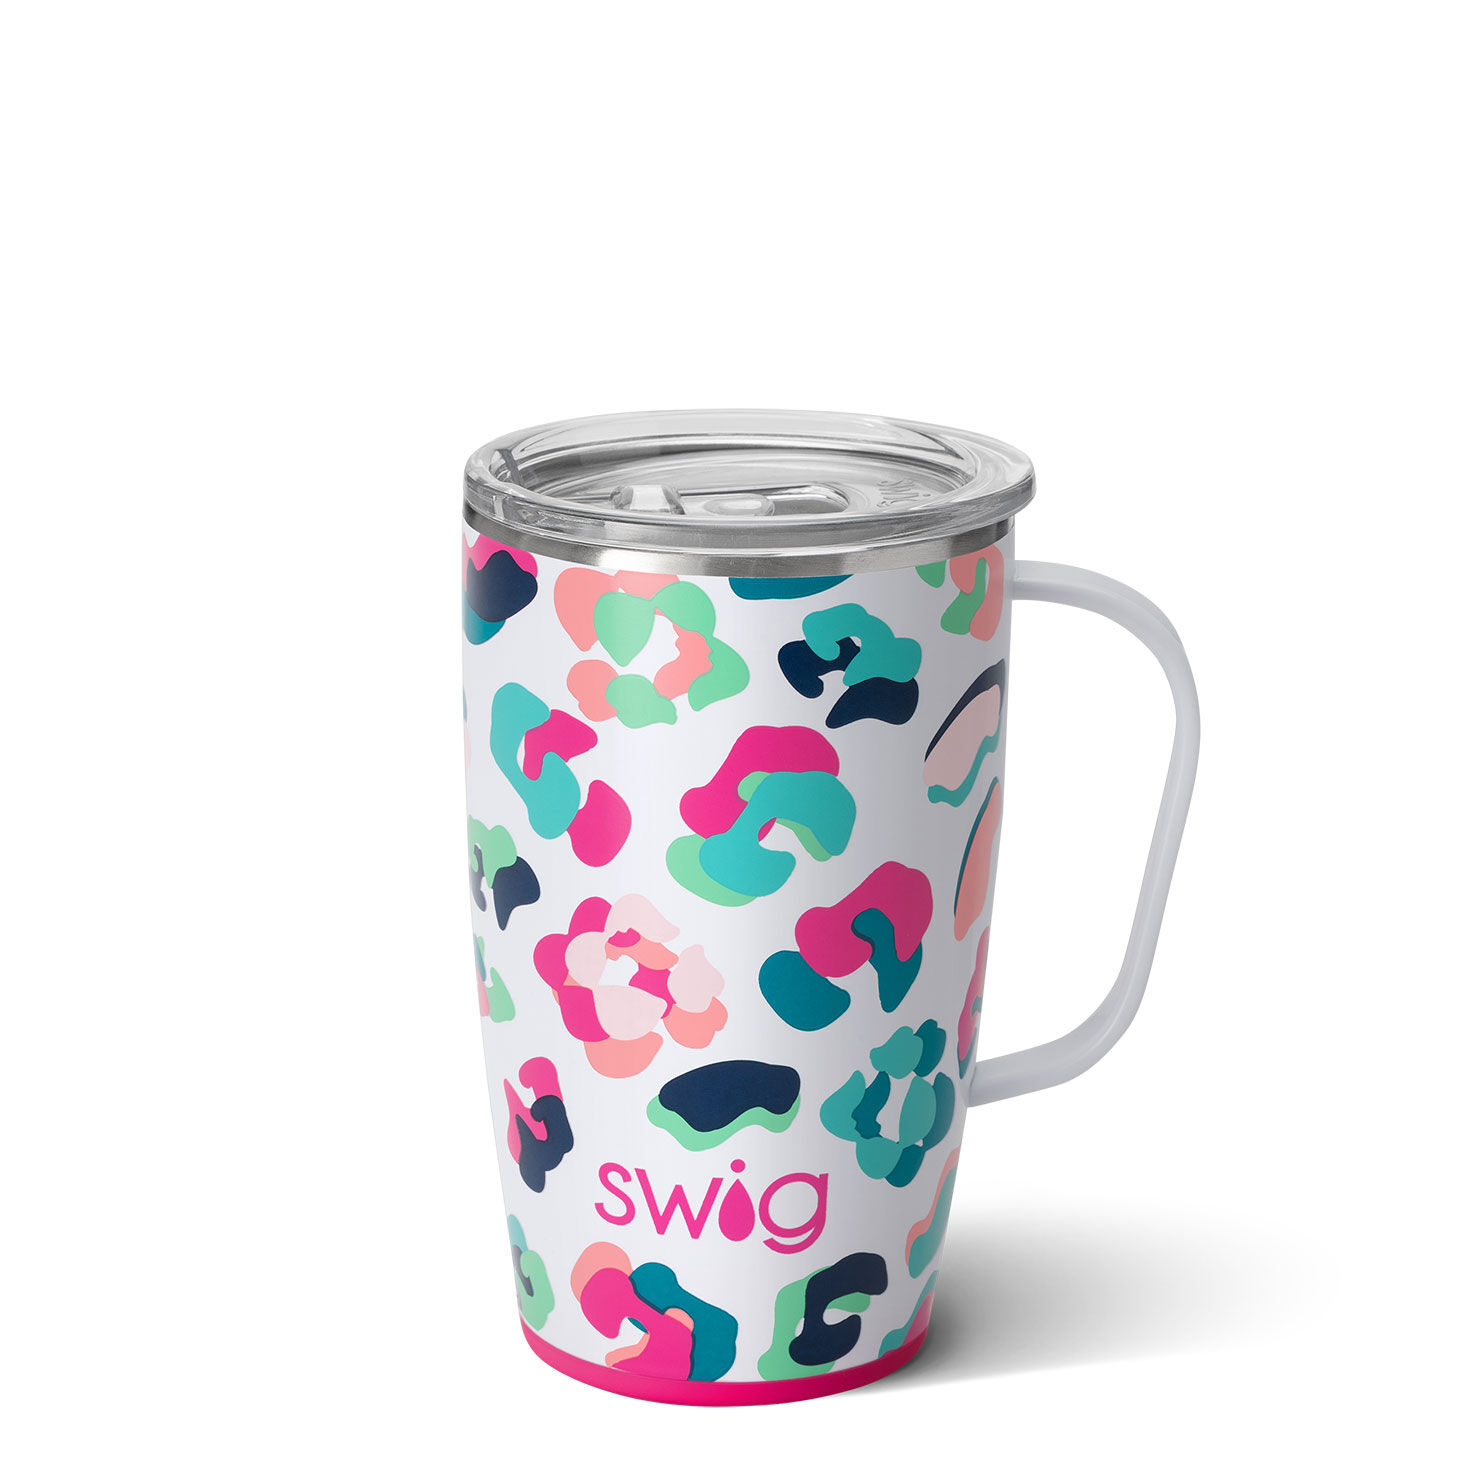 https://www.hallmark.com/dw/image/v2/AALB_PRD/on/demandware.static/-/Sites-hallmark-master/default/dw332f935a/images/finished-goods/products/S102C18PA/BluePink-Leopard-Print-Insulated-Mug-With-Lid_S102C18PA_01.jpg?sfrm=jpg